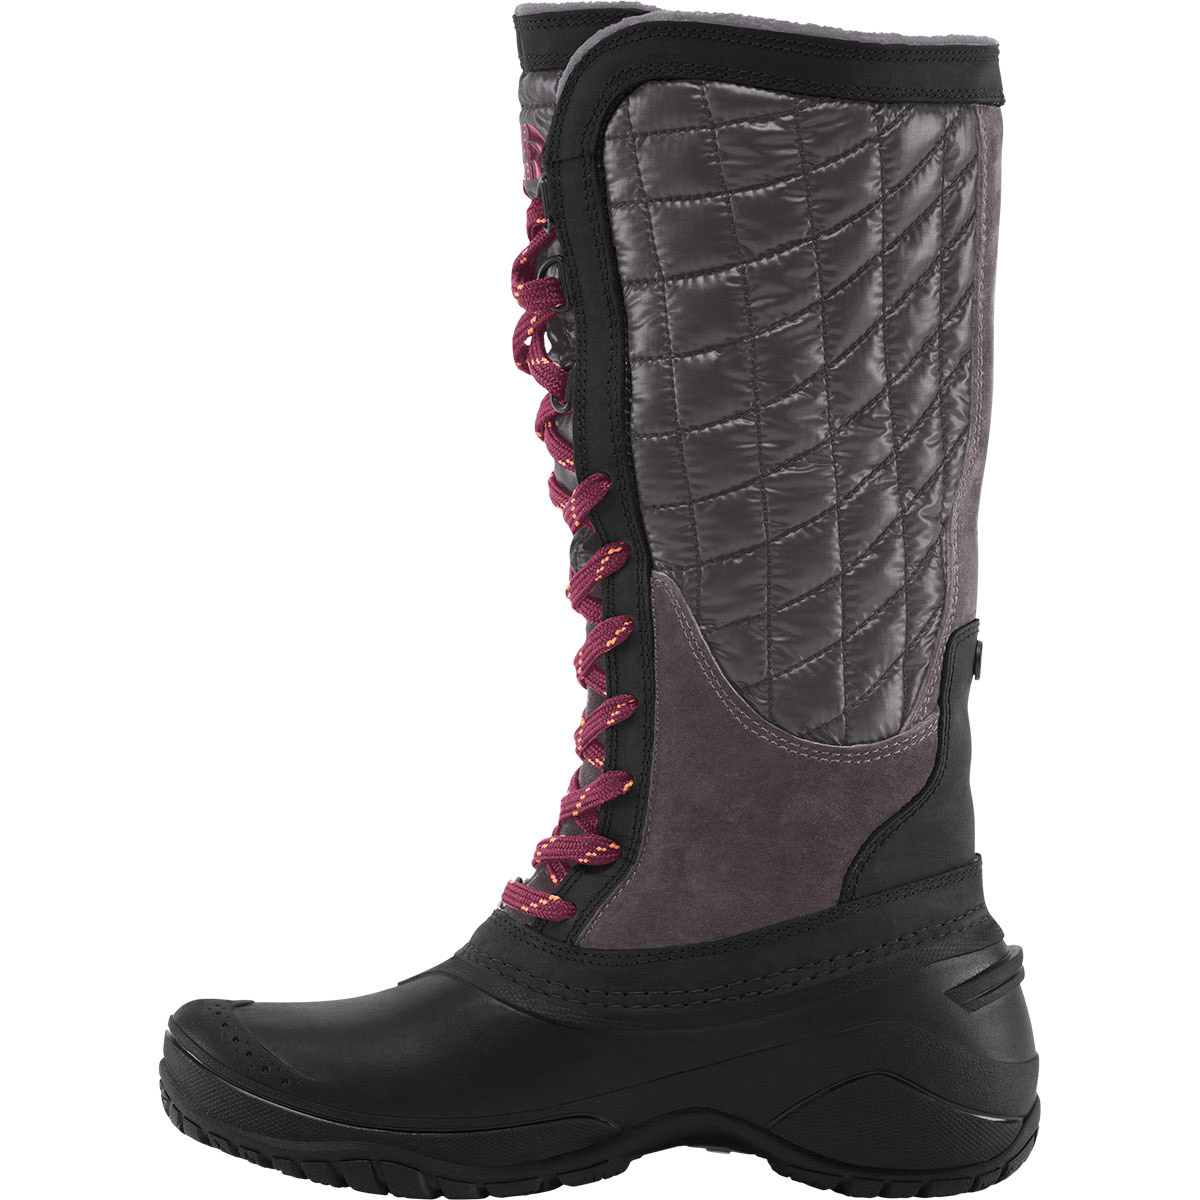 thermoball north face womens boots